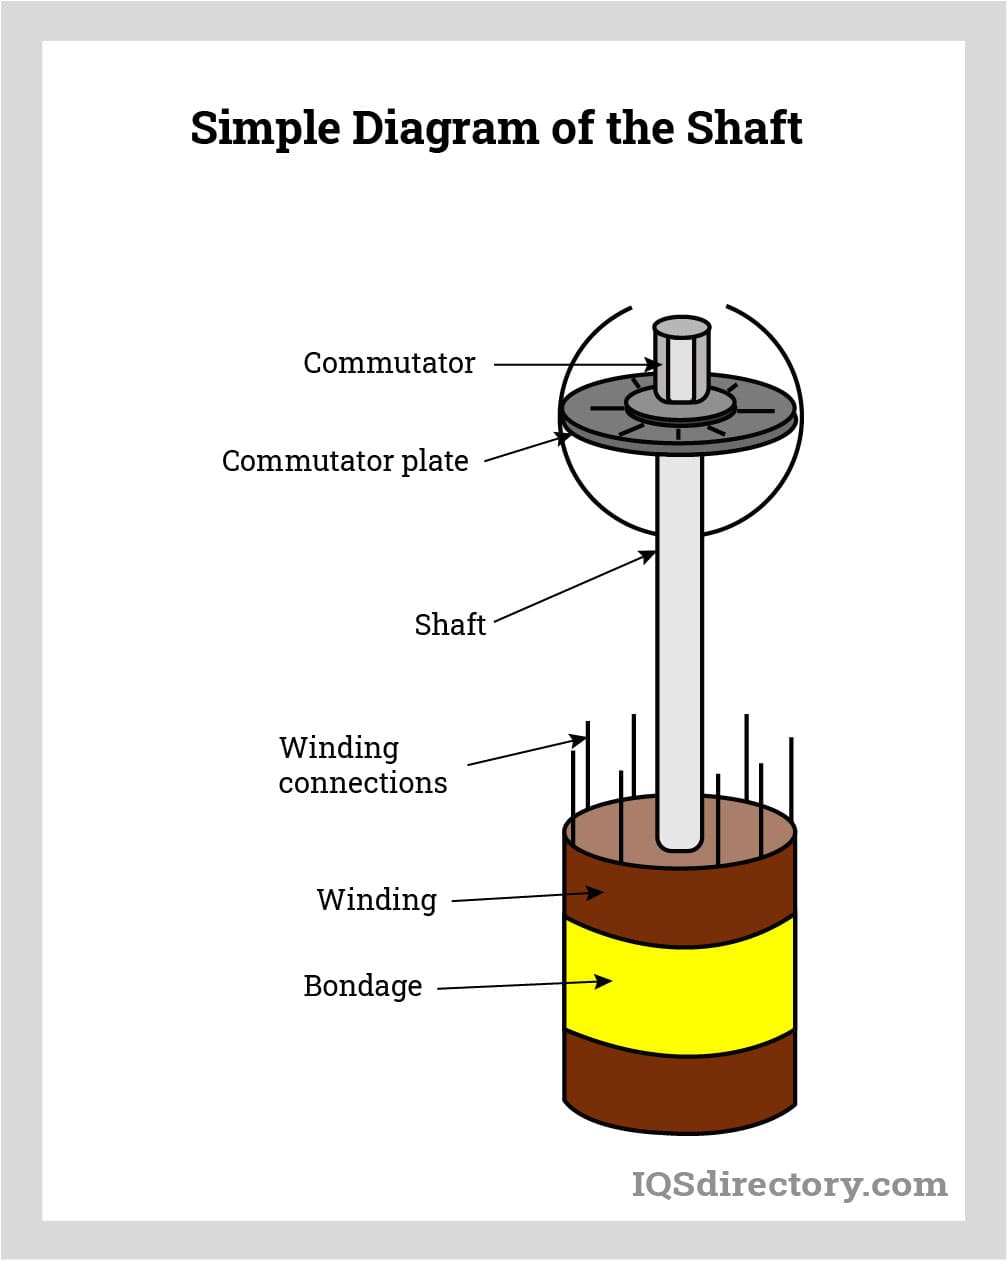 DC Motor: What Is It? How Does It Work? Types, Uses